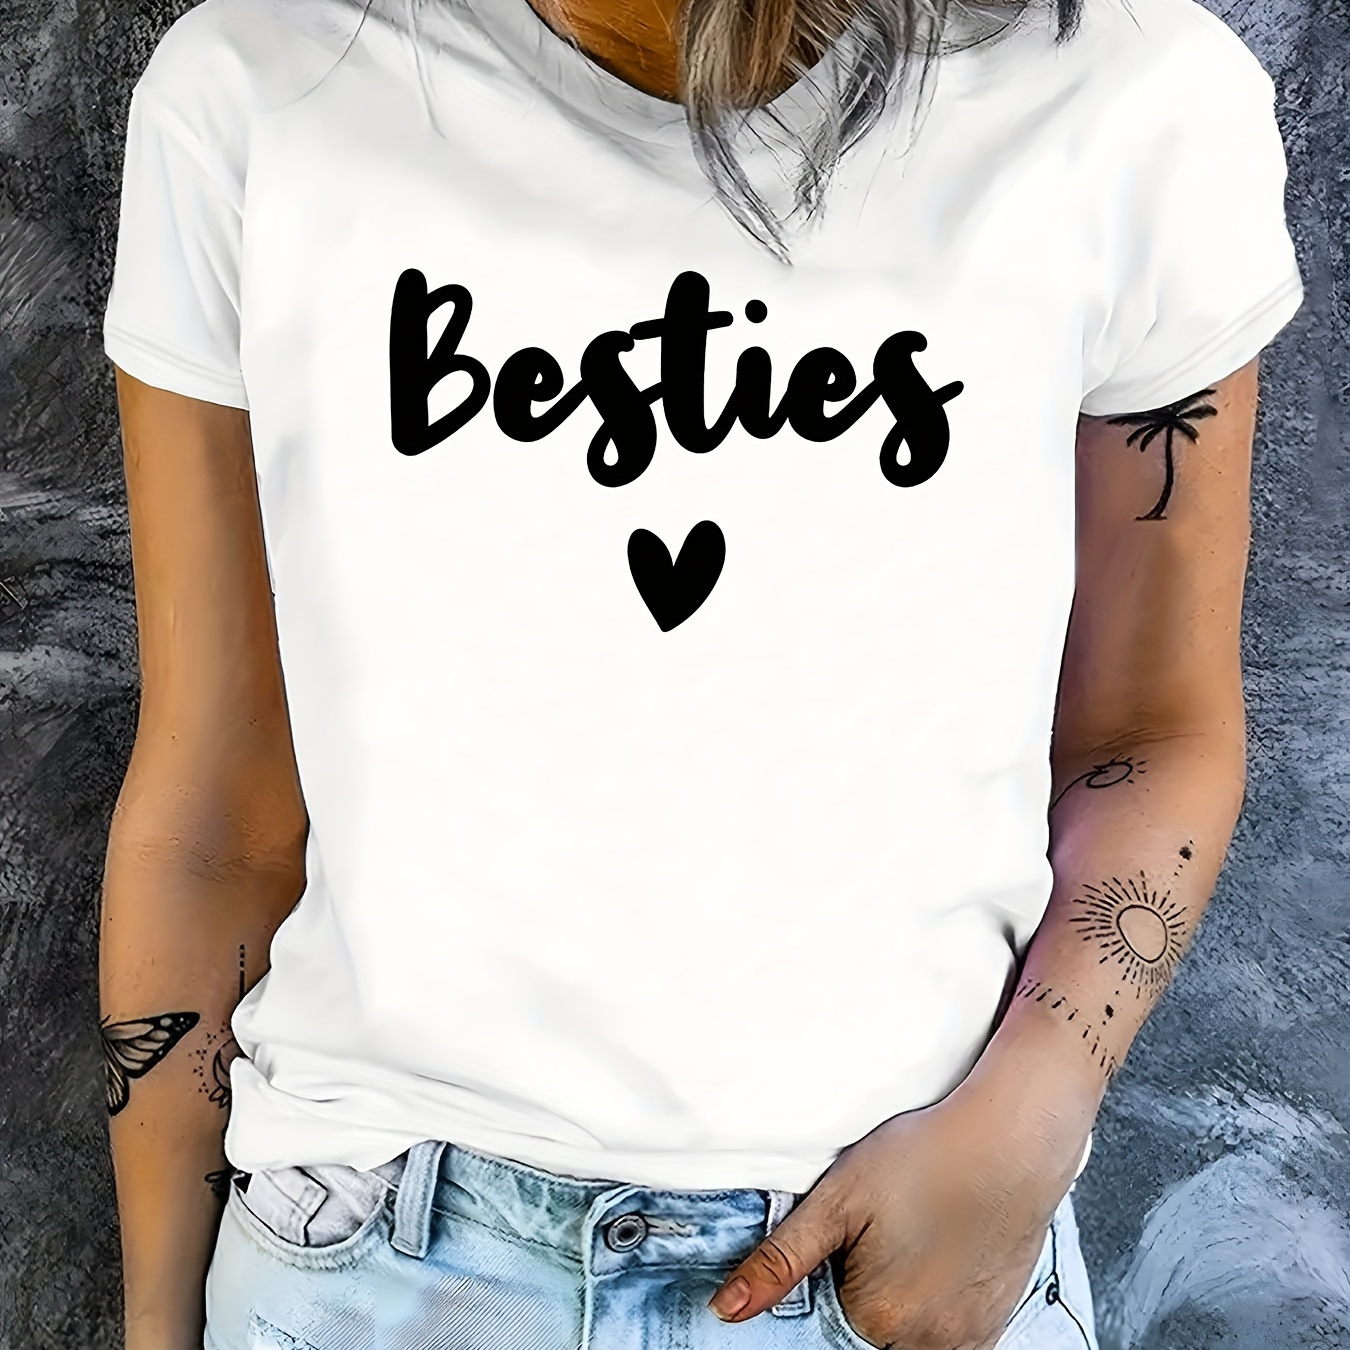 

Besties Letter & Heart Print T-shirt, Short Sleeve Crew Neck Casual Top For Summer & Spring, Women's Clothing